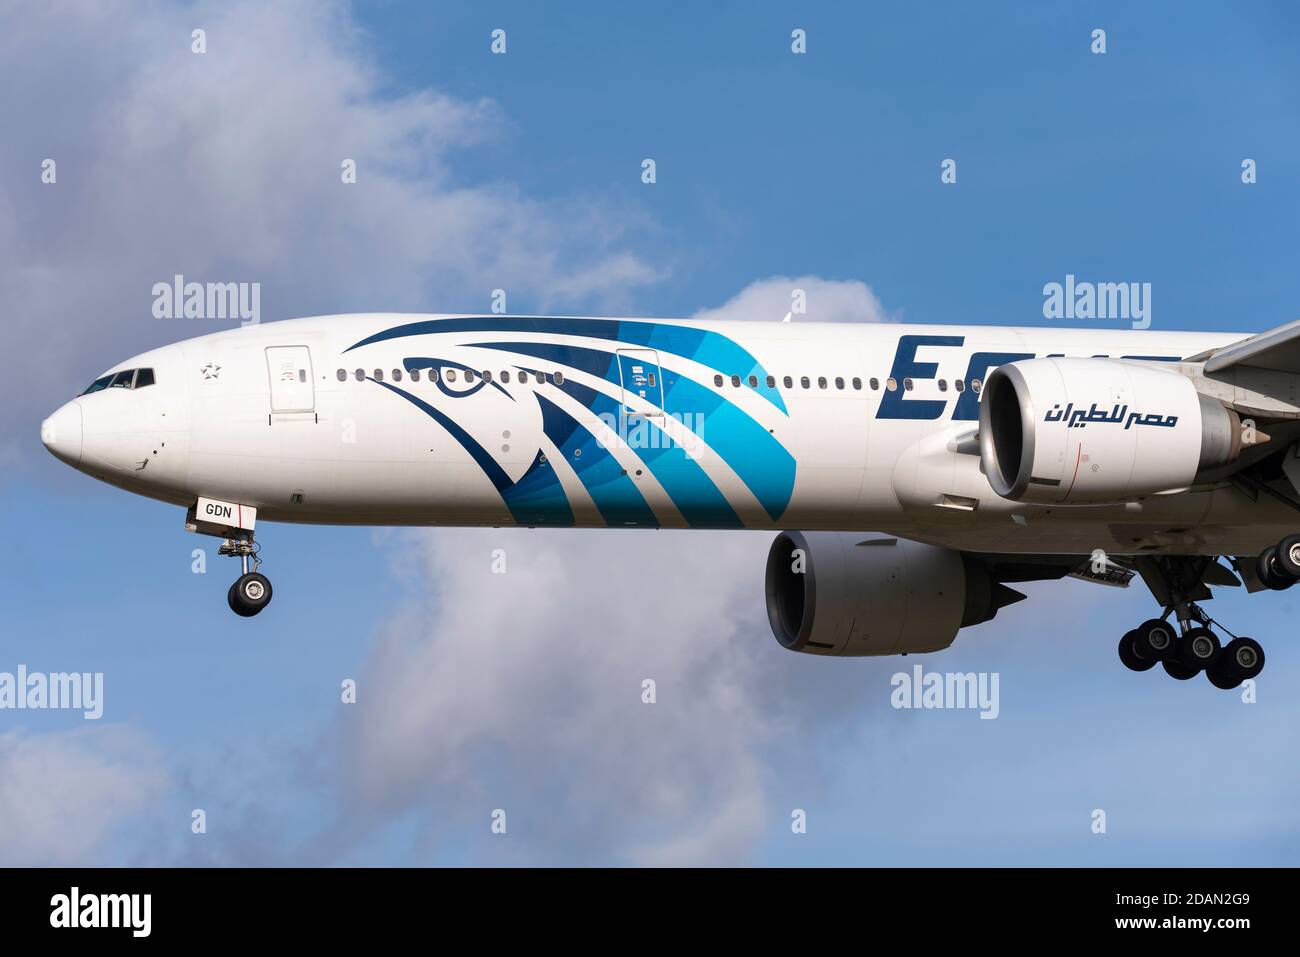 EgyptAir Boeing 777 jet airliner plane SU-GDN on approach to land at London Heathrow Airport, UK, during COVID 19 lockdown. Horus sky deity livery Stock Photo